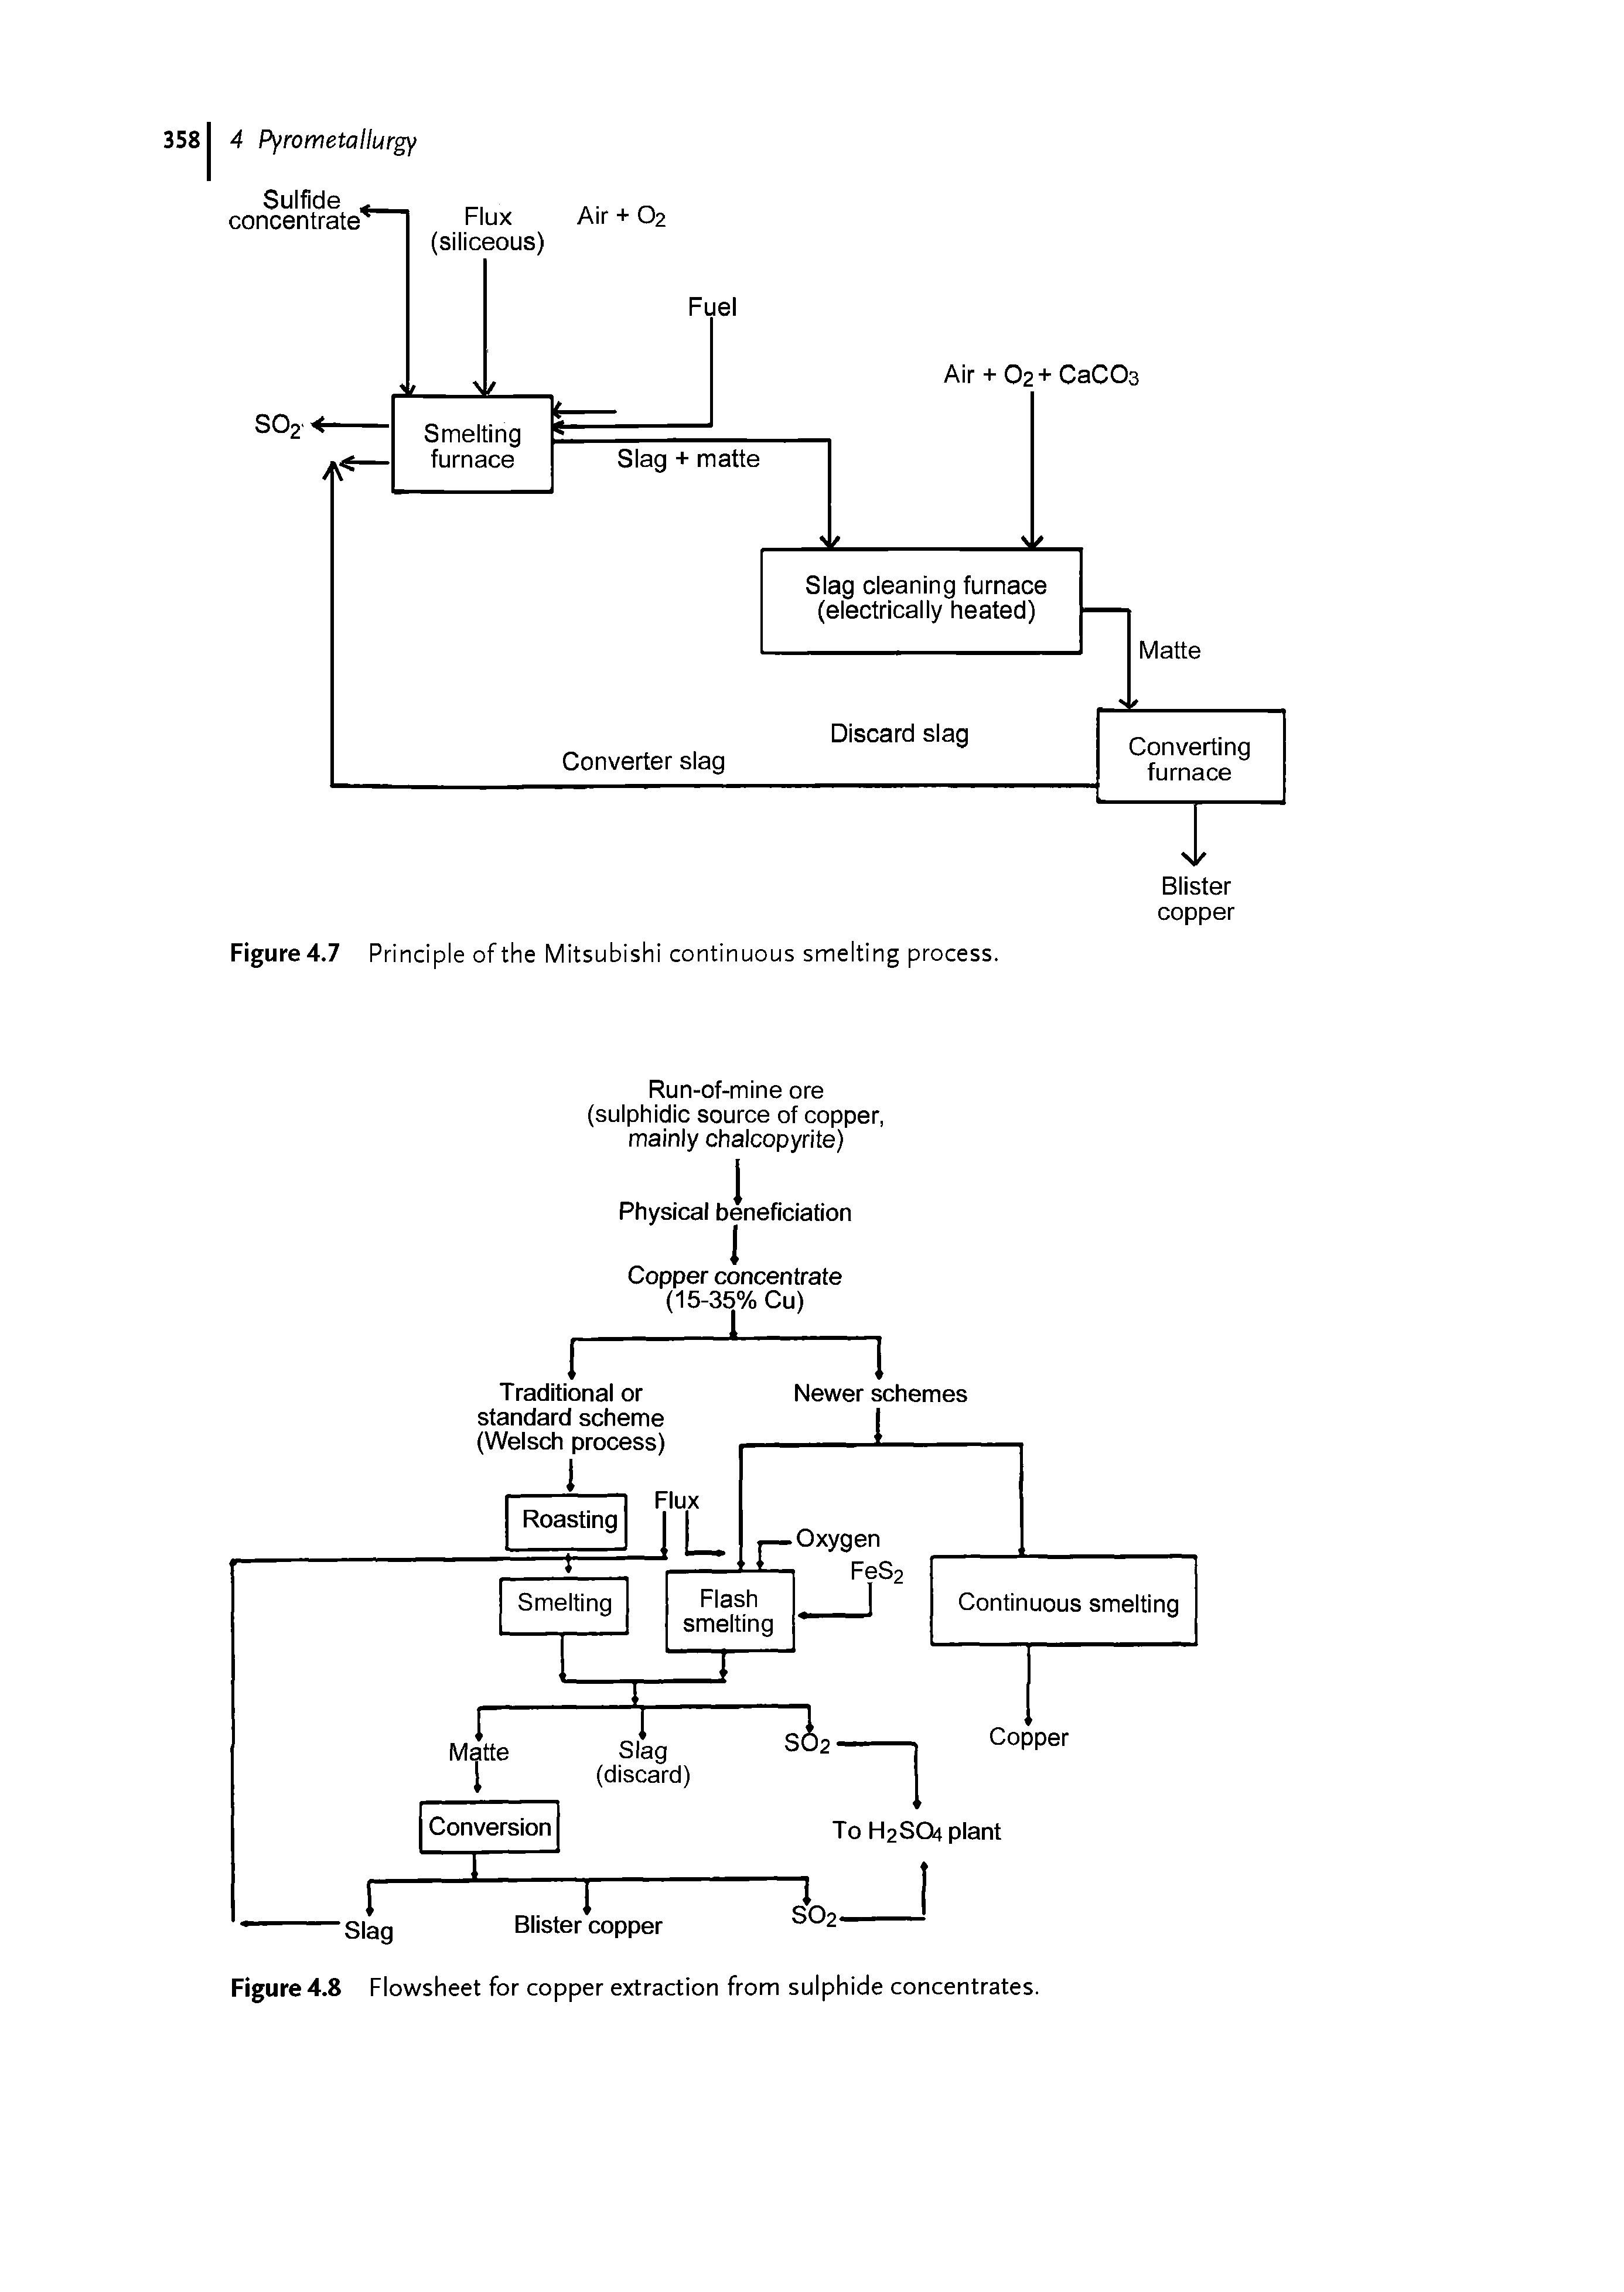 Figure 4.8 Flowsheet for copper extraction from sulphide concentrates.